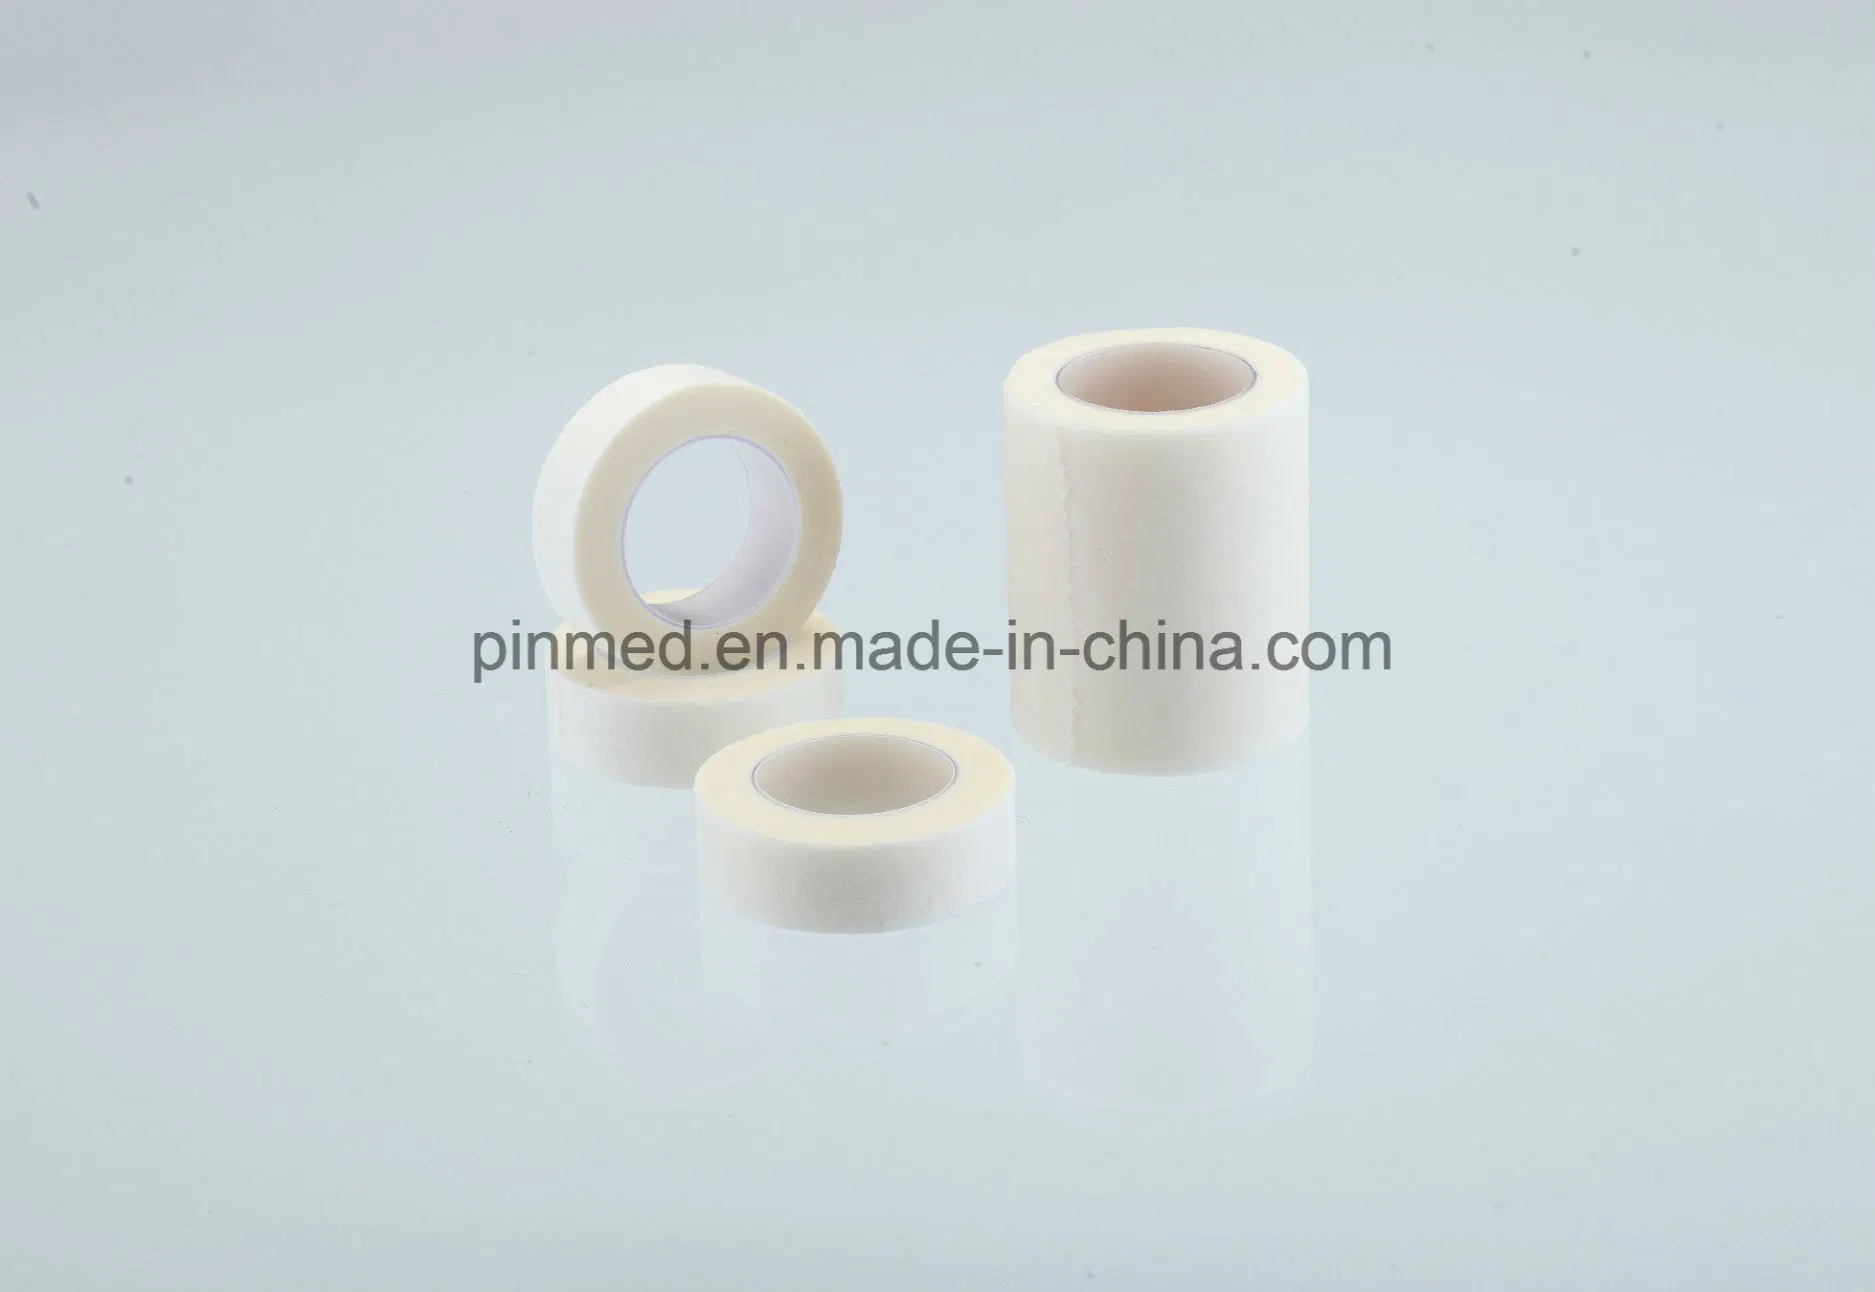 Pinmed Disposable Non-Woven Surgical Tape